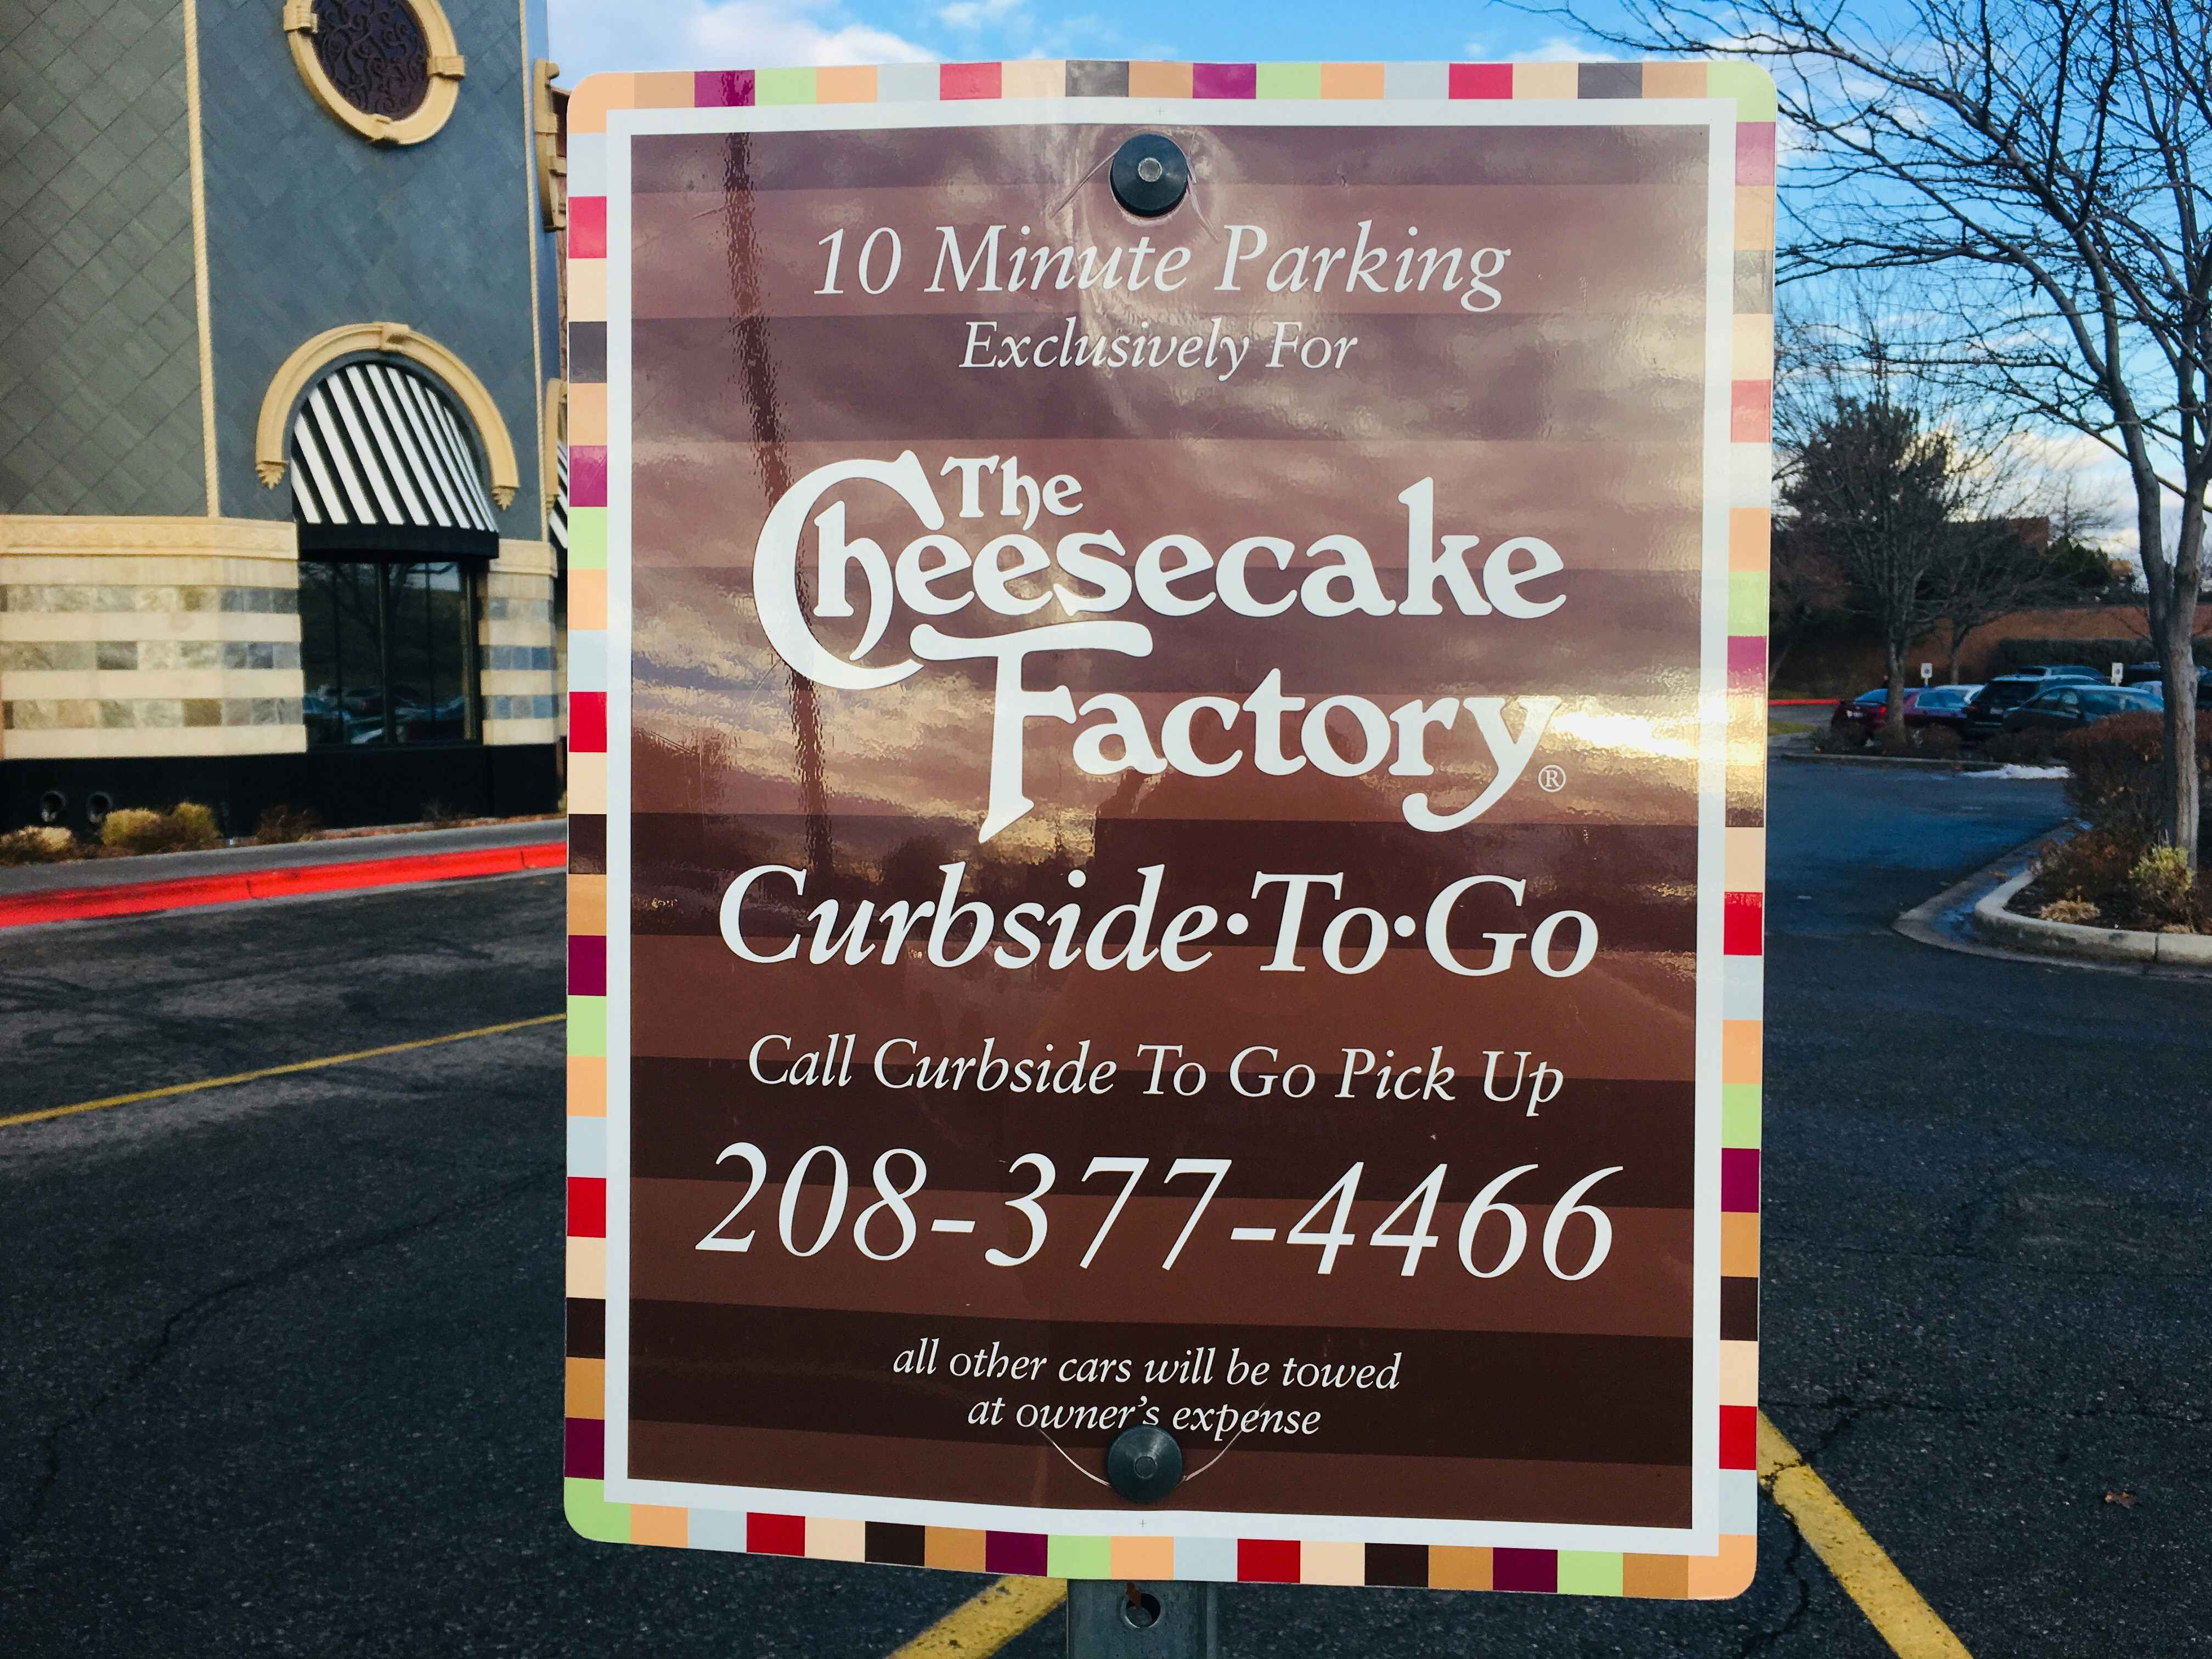 A 10 minute parking sign to designate the Curbside-to-go parking space outside of The Cheesecake Factory.